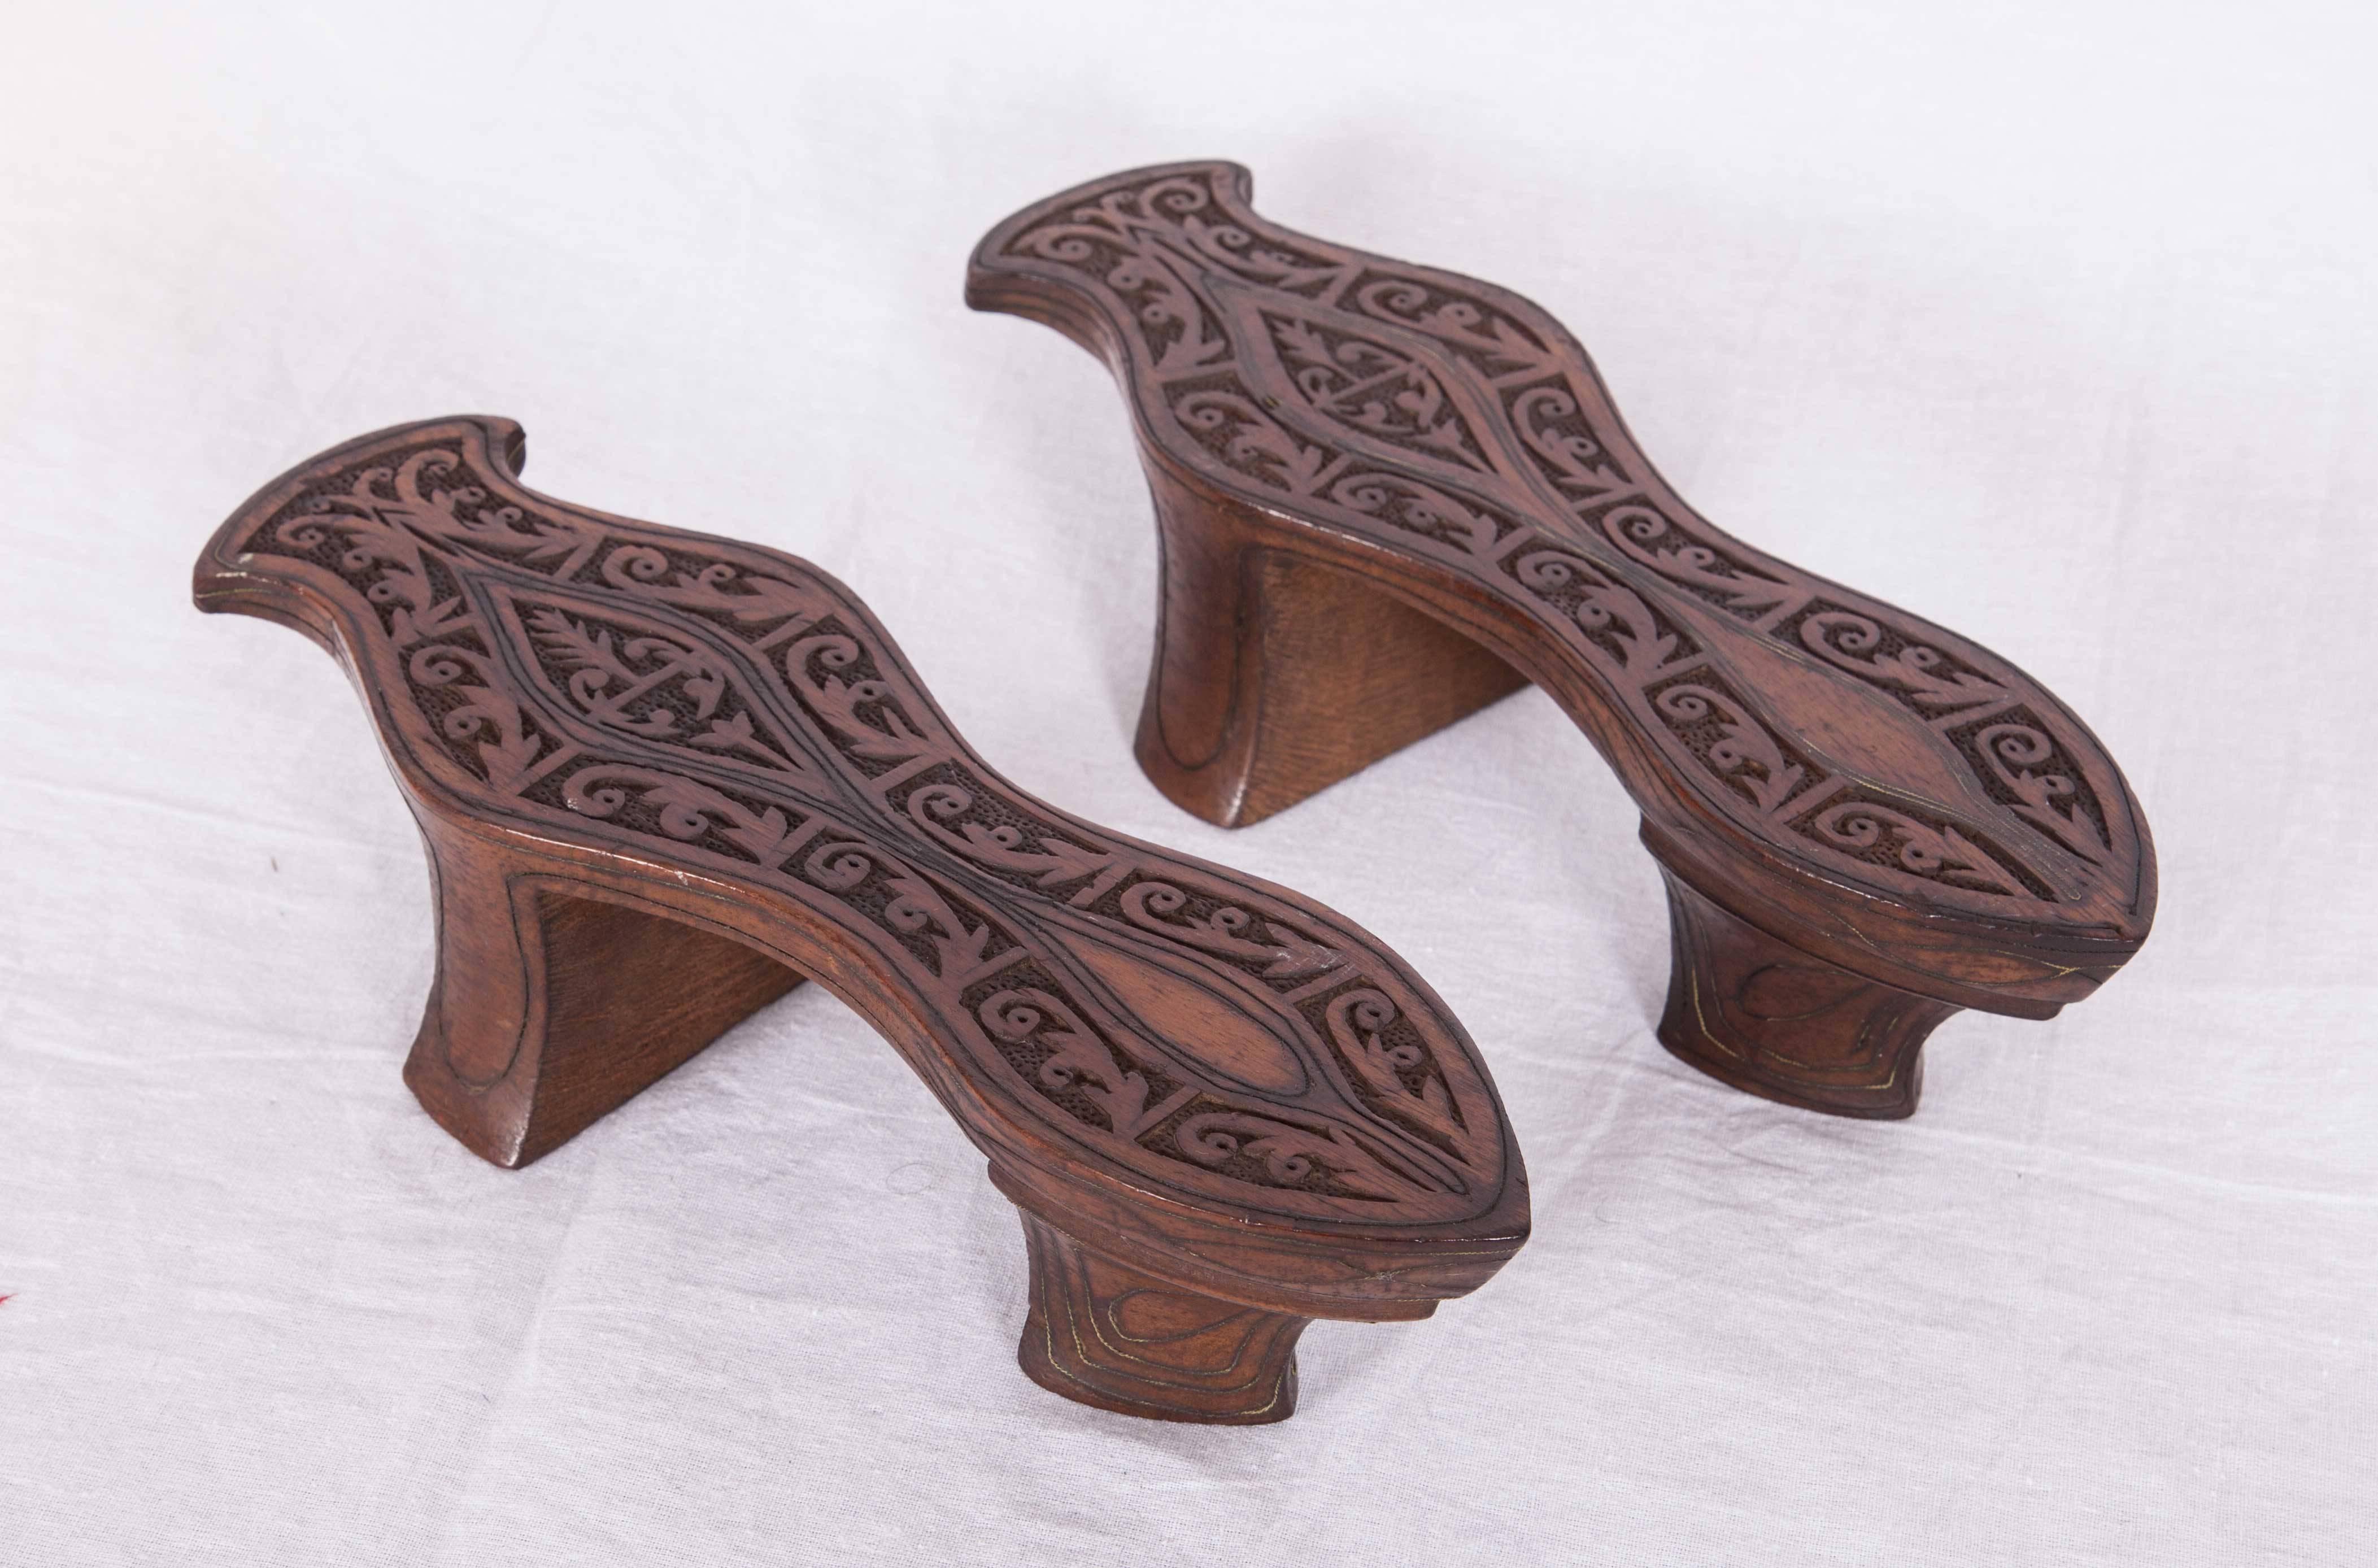 Carved Late 19th-Early 20th Century Ottoman Turkish Bath Clogs 'Nalin in Turkish' For Sale